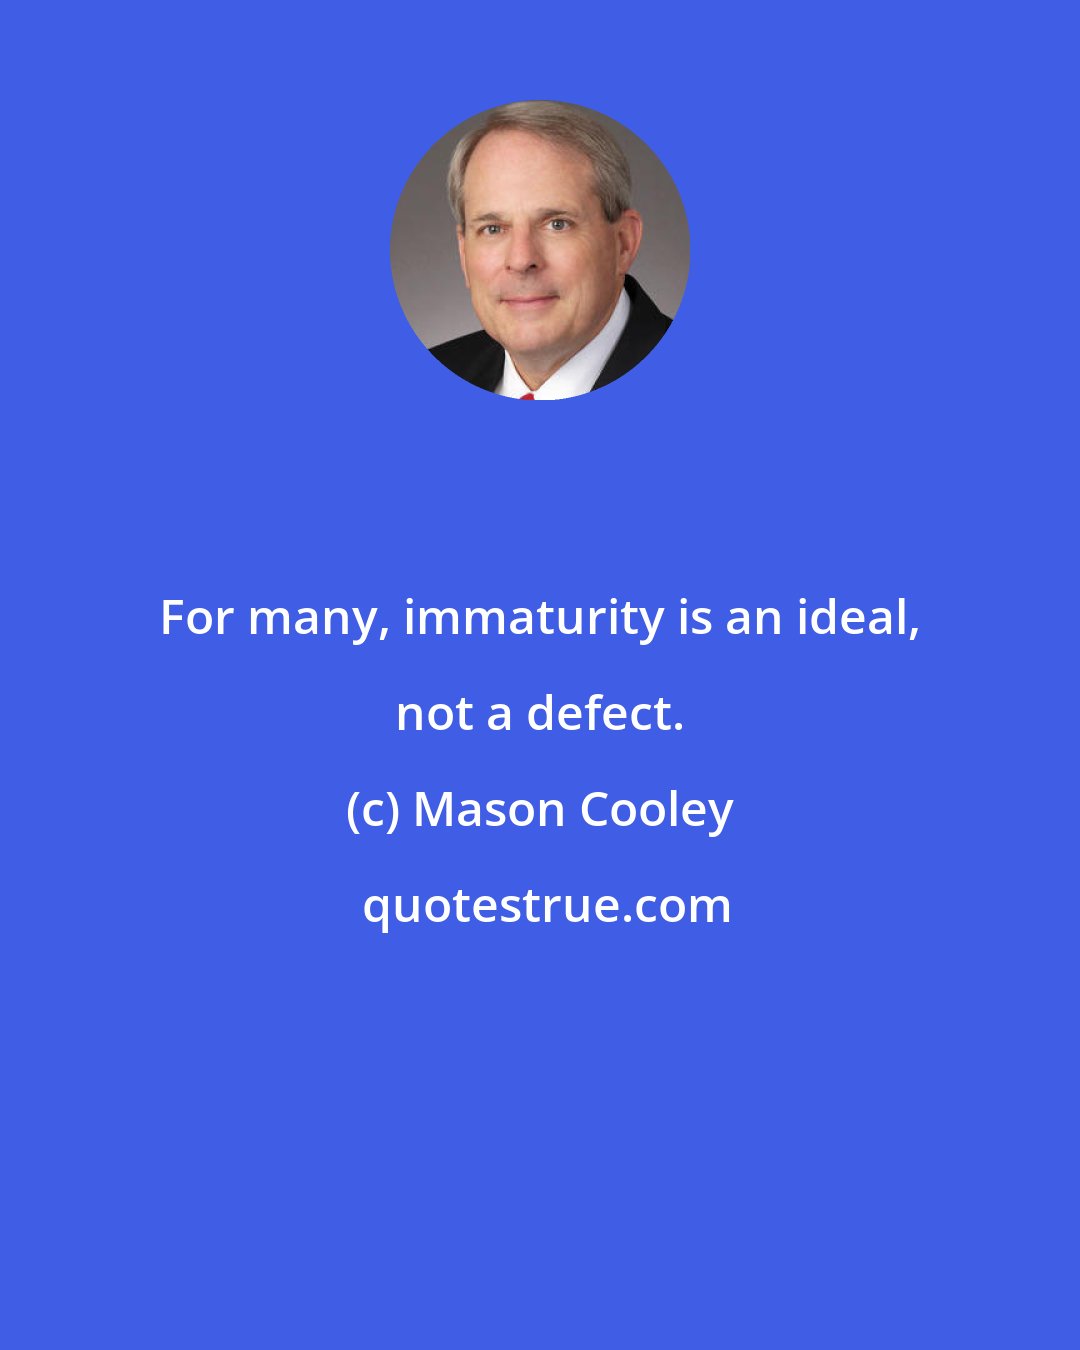 Mason Cooley: For many, immaturity is an ideal, not a defect.